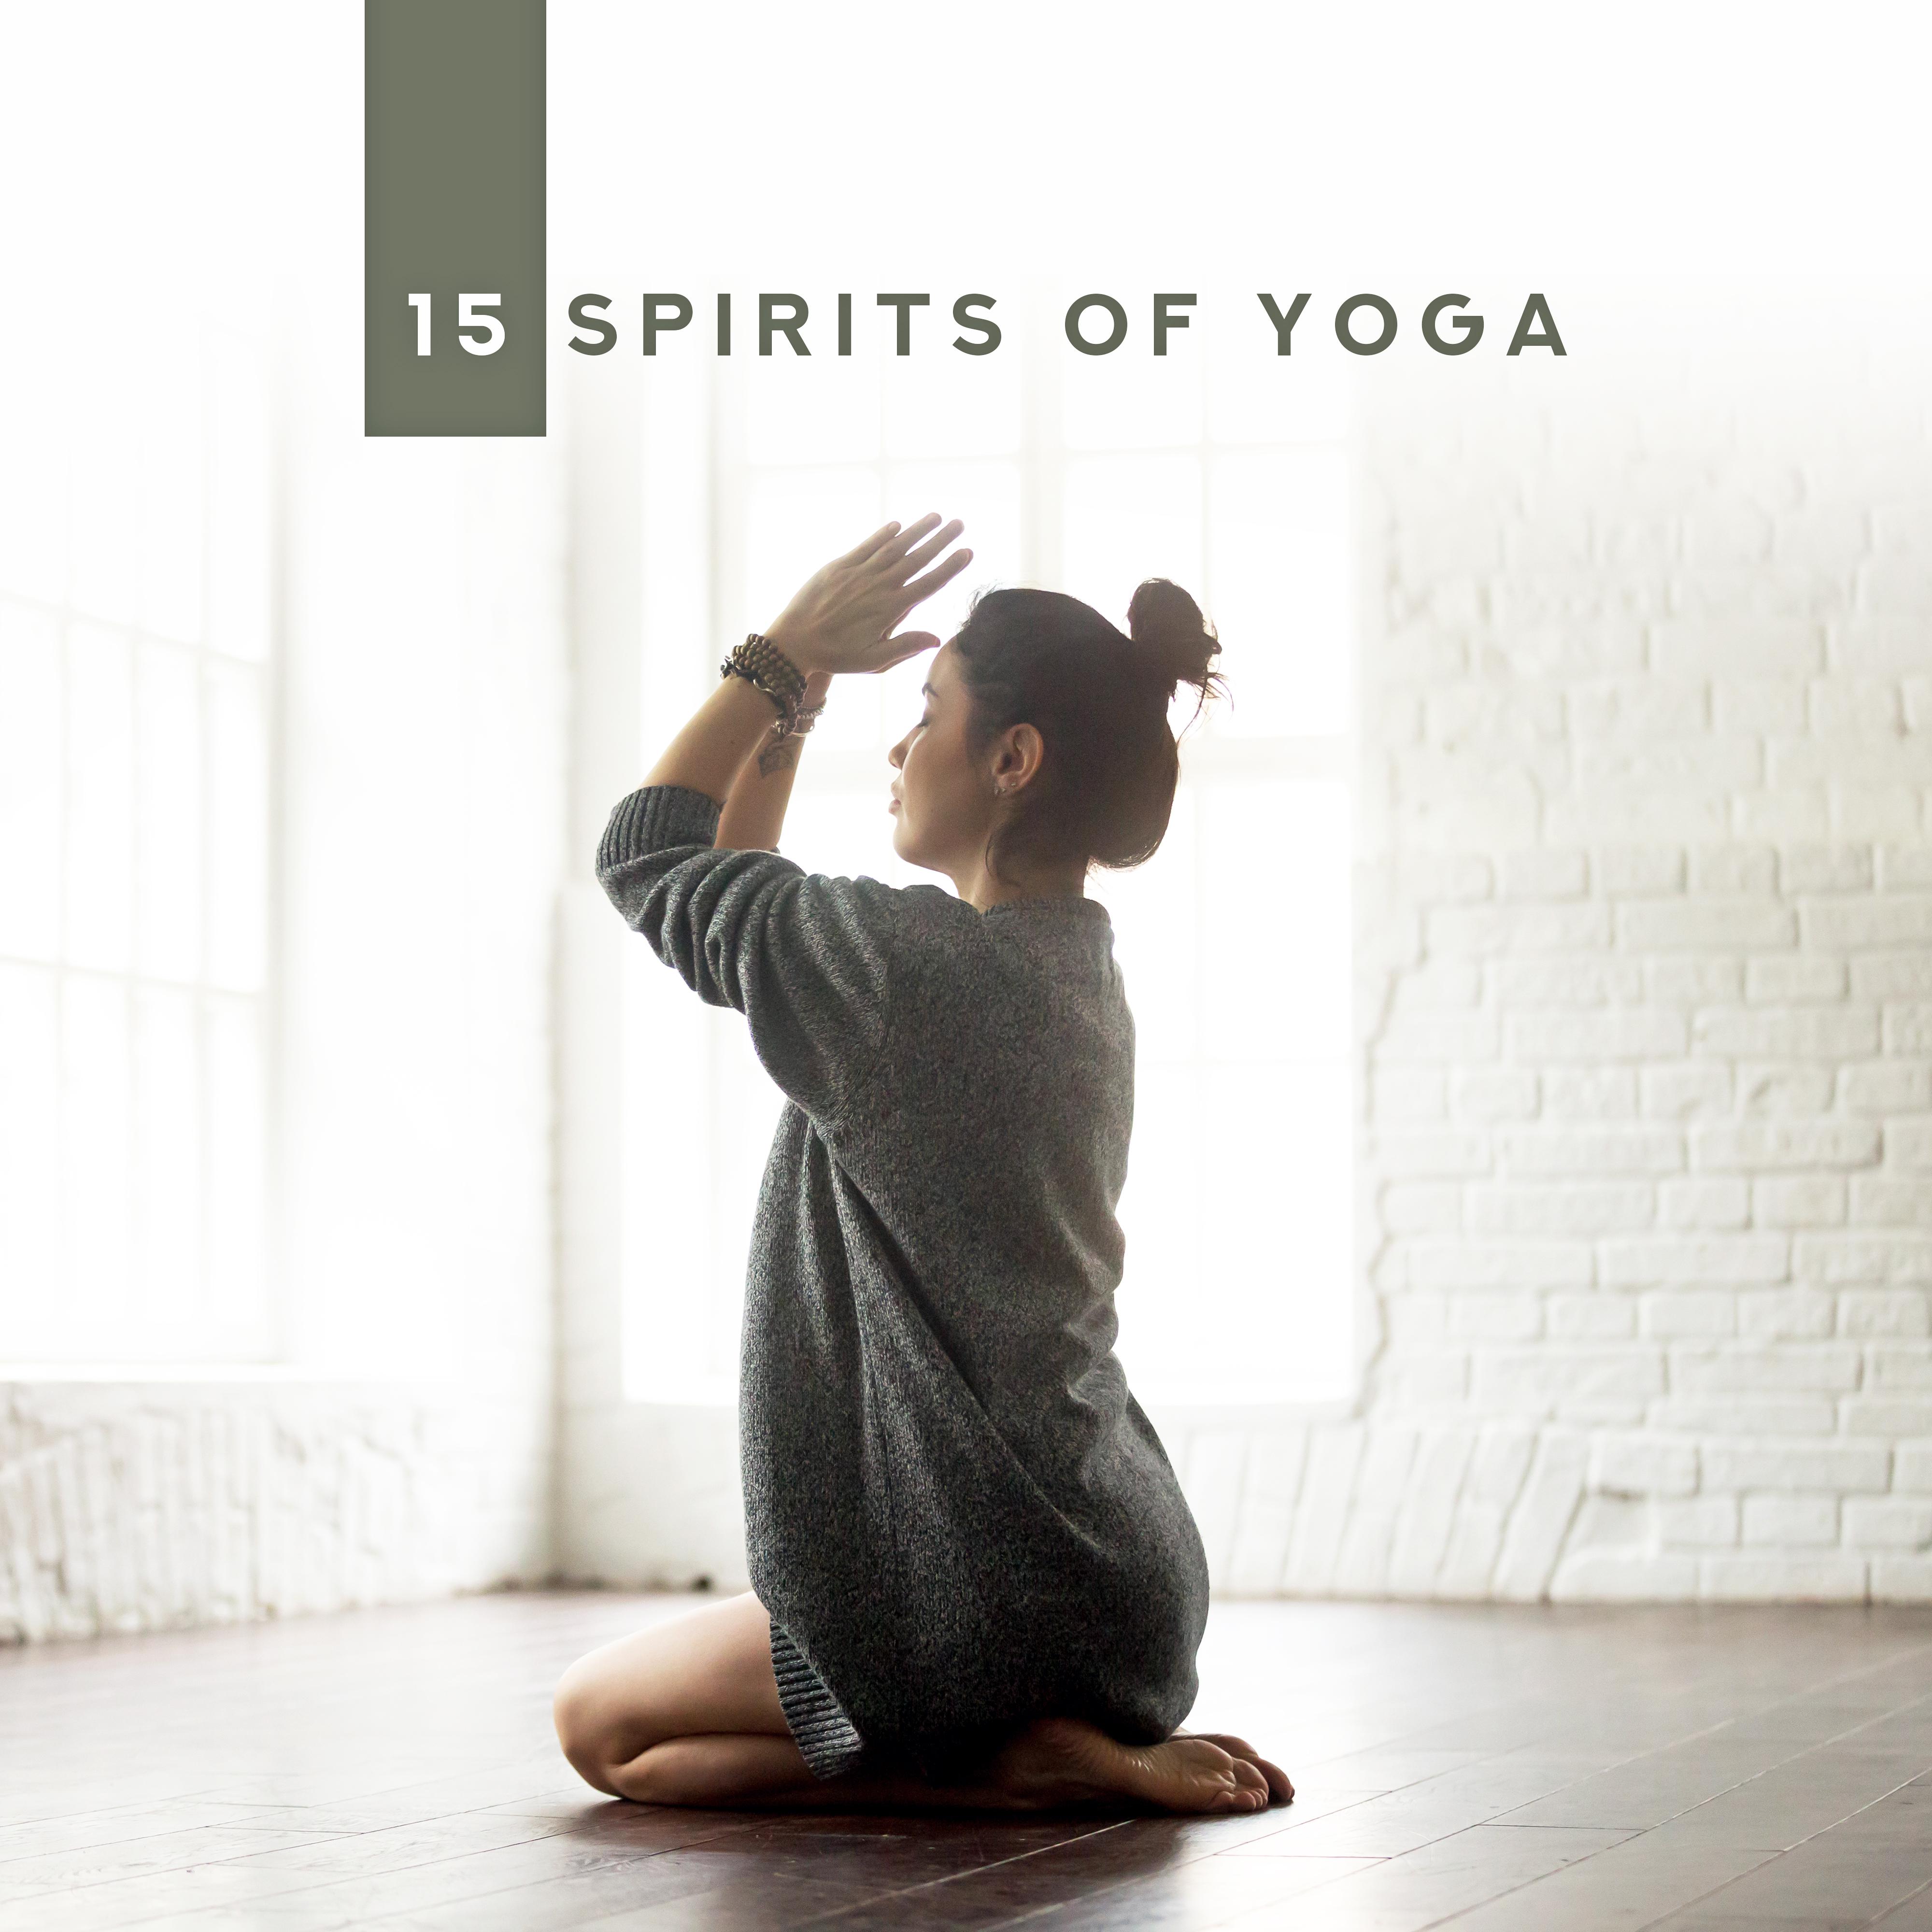 15 Spirits of Yoga: New Age 2019 Music Compilation for Best Meditation Experience, Soothing Sounds for Deep Relaxation, Body & Mind Healing Songs